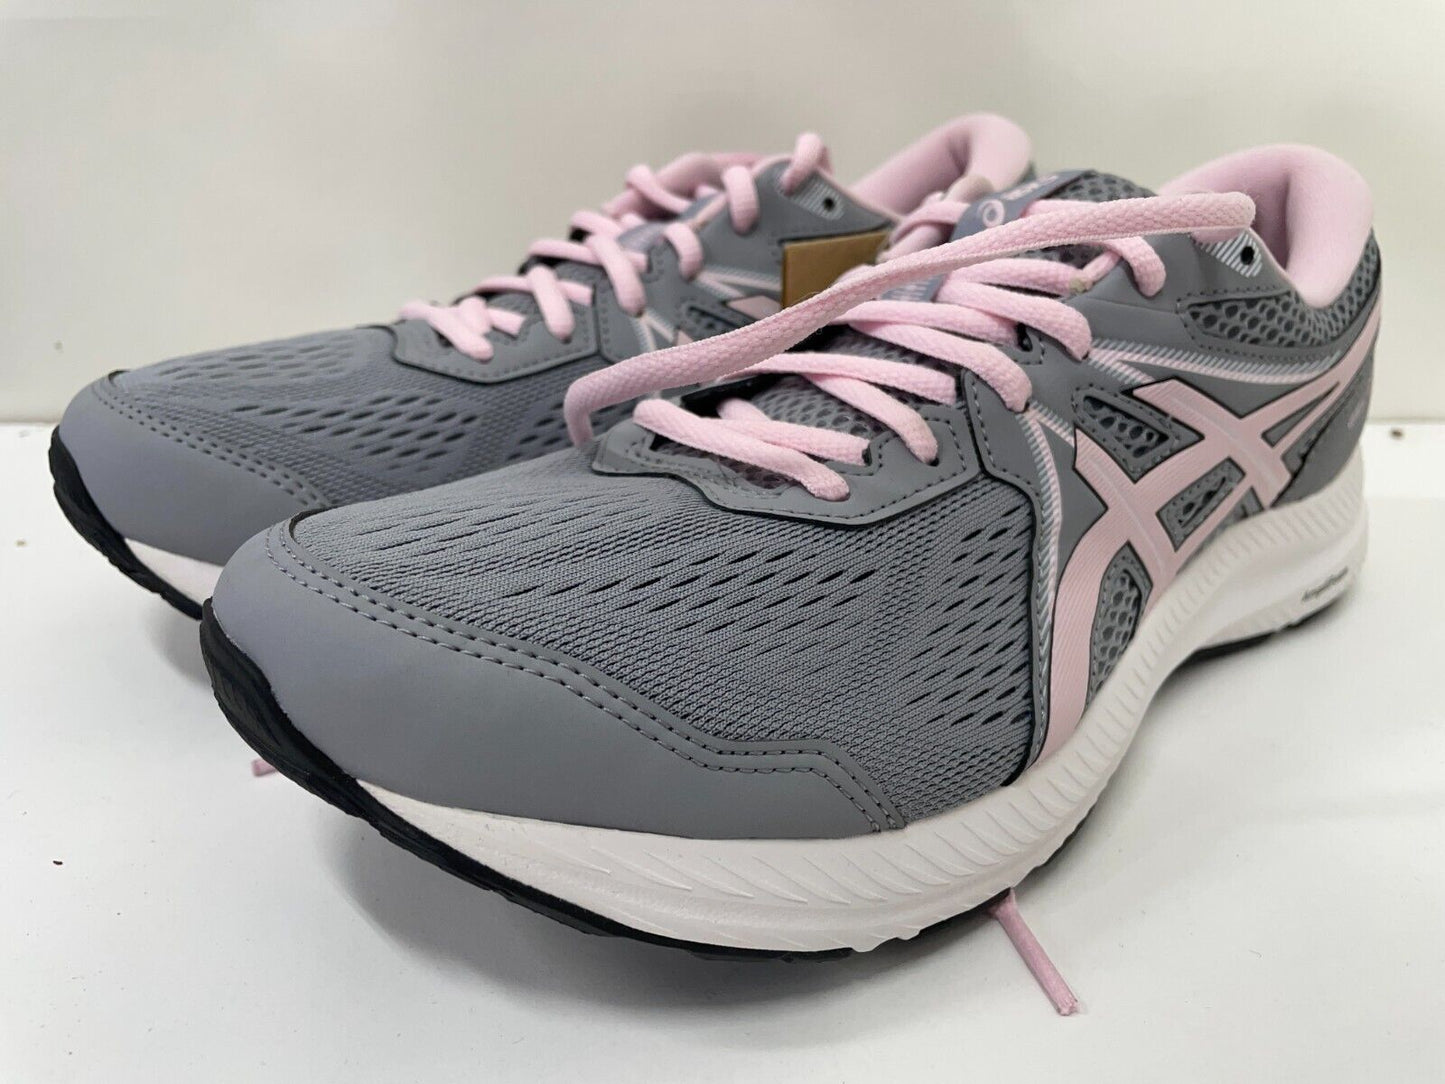 Asics Womens 11 GEL-Contend 7 Running Shoes Gray Pink Low Top Sneakers 1012A911